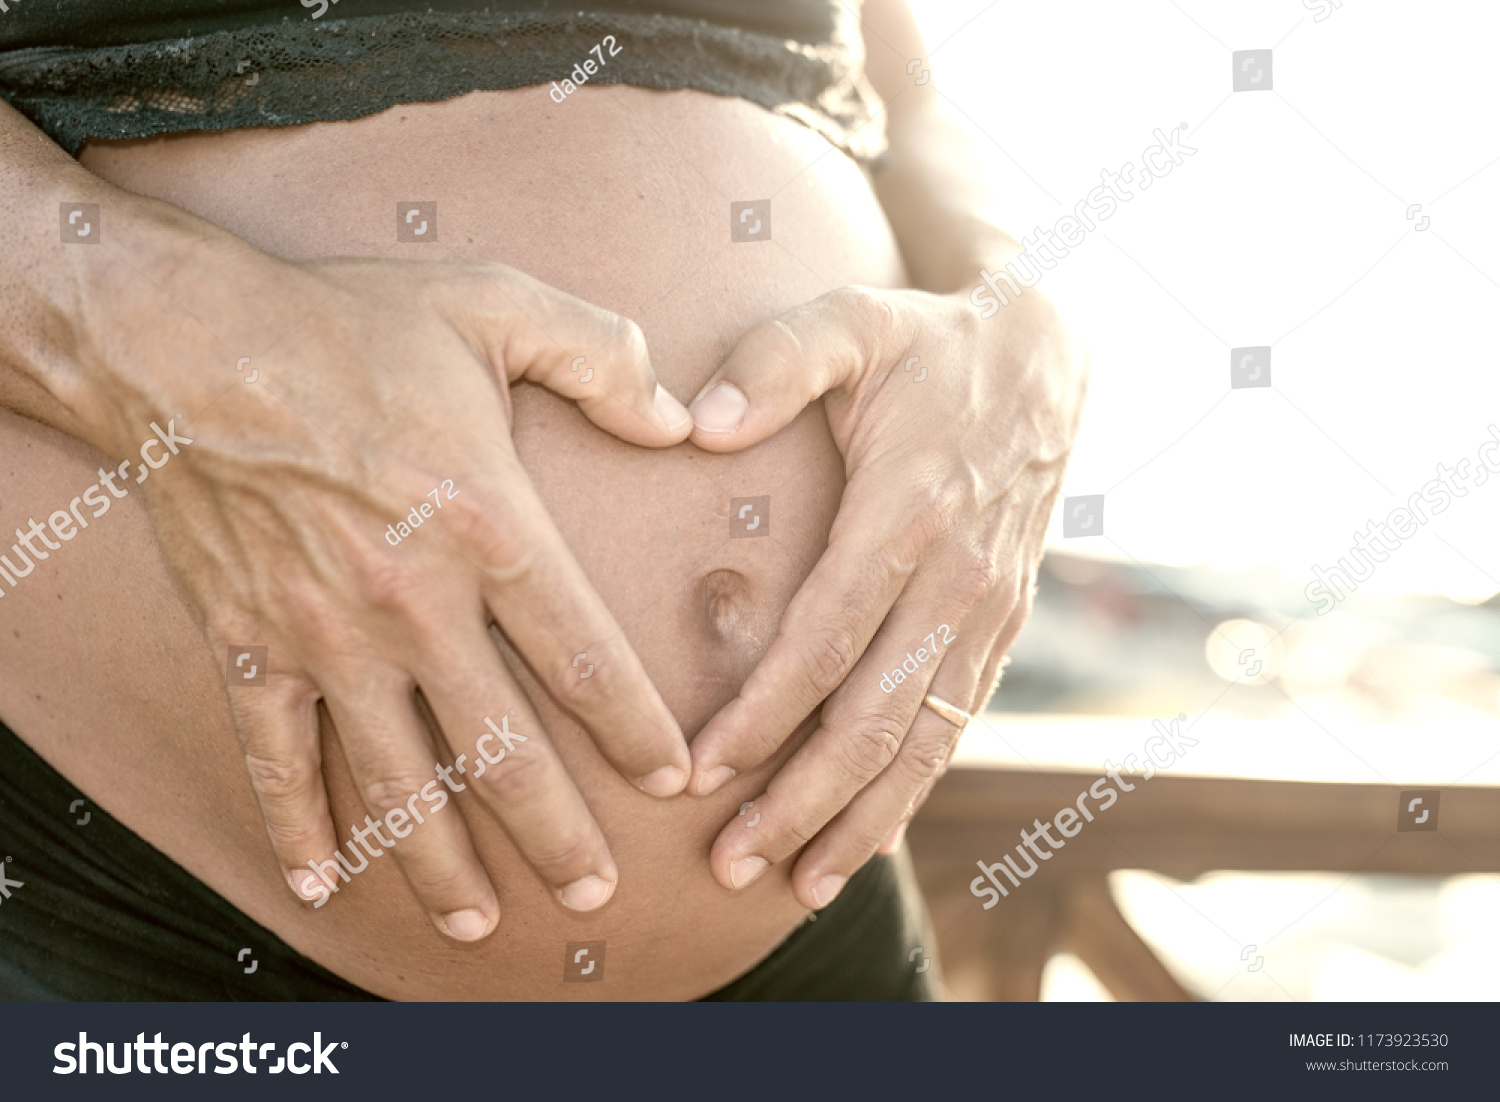 Pregnant woman on the beach - hands of the husband in heart shape on belly. #1173923530